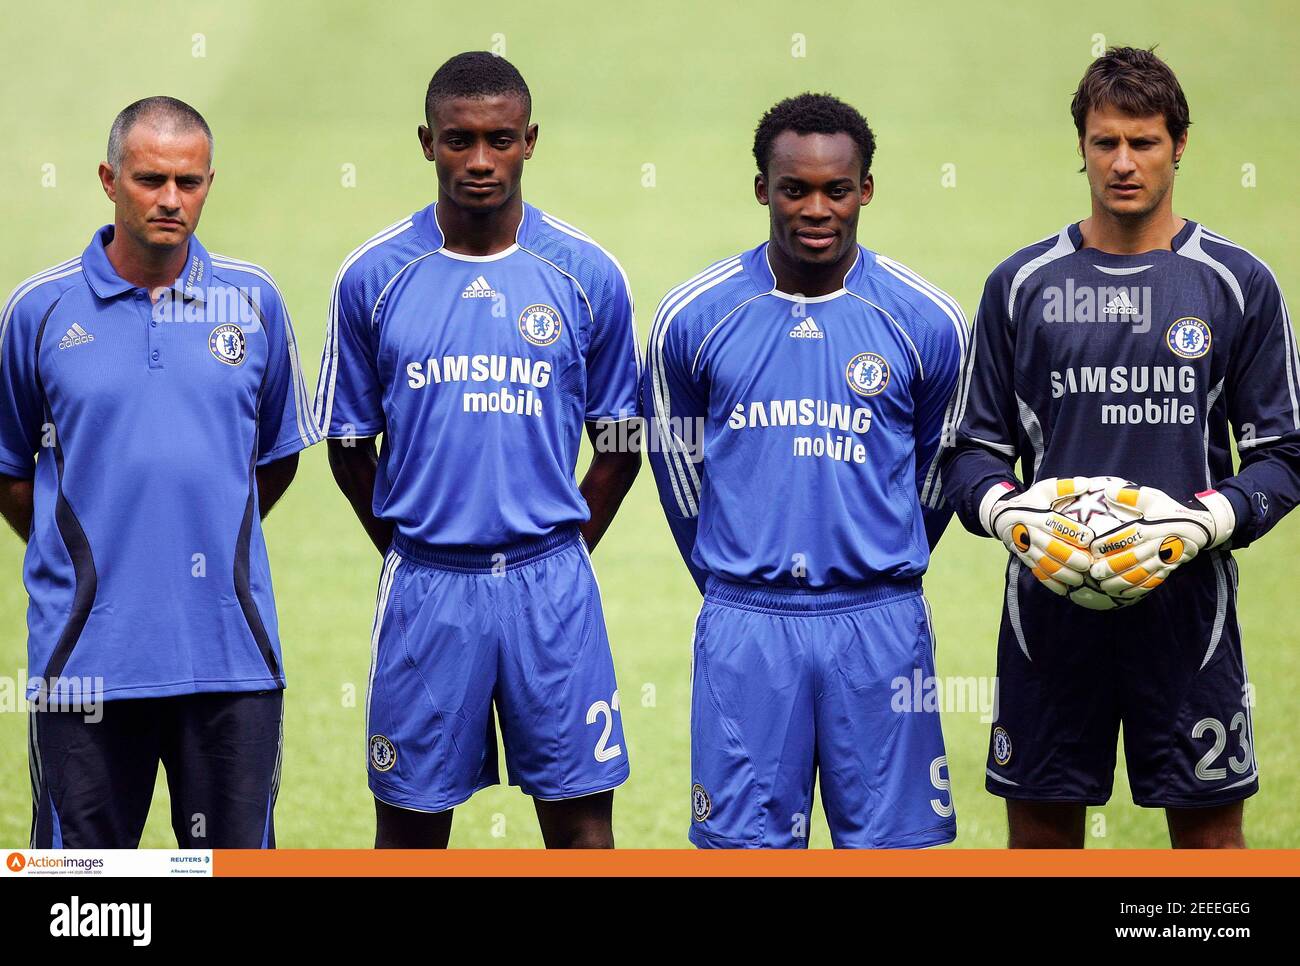 Football - Chelsea - adidas Official Kit Launch 2006/07 - Stamford Bridge -  20/7/06 Chelsea manager Jose Mourinho (L), stands with Salomon Kalou (2nd  L), Michael Essien (2nd R) and Carlo Cudicini (